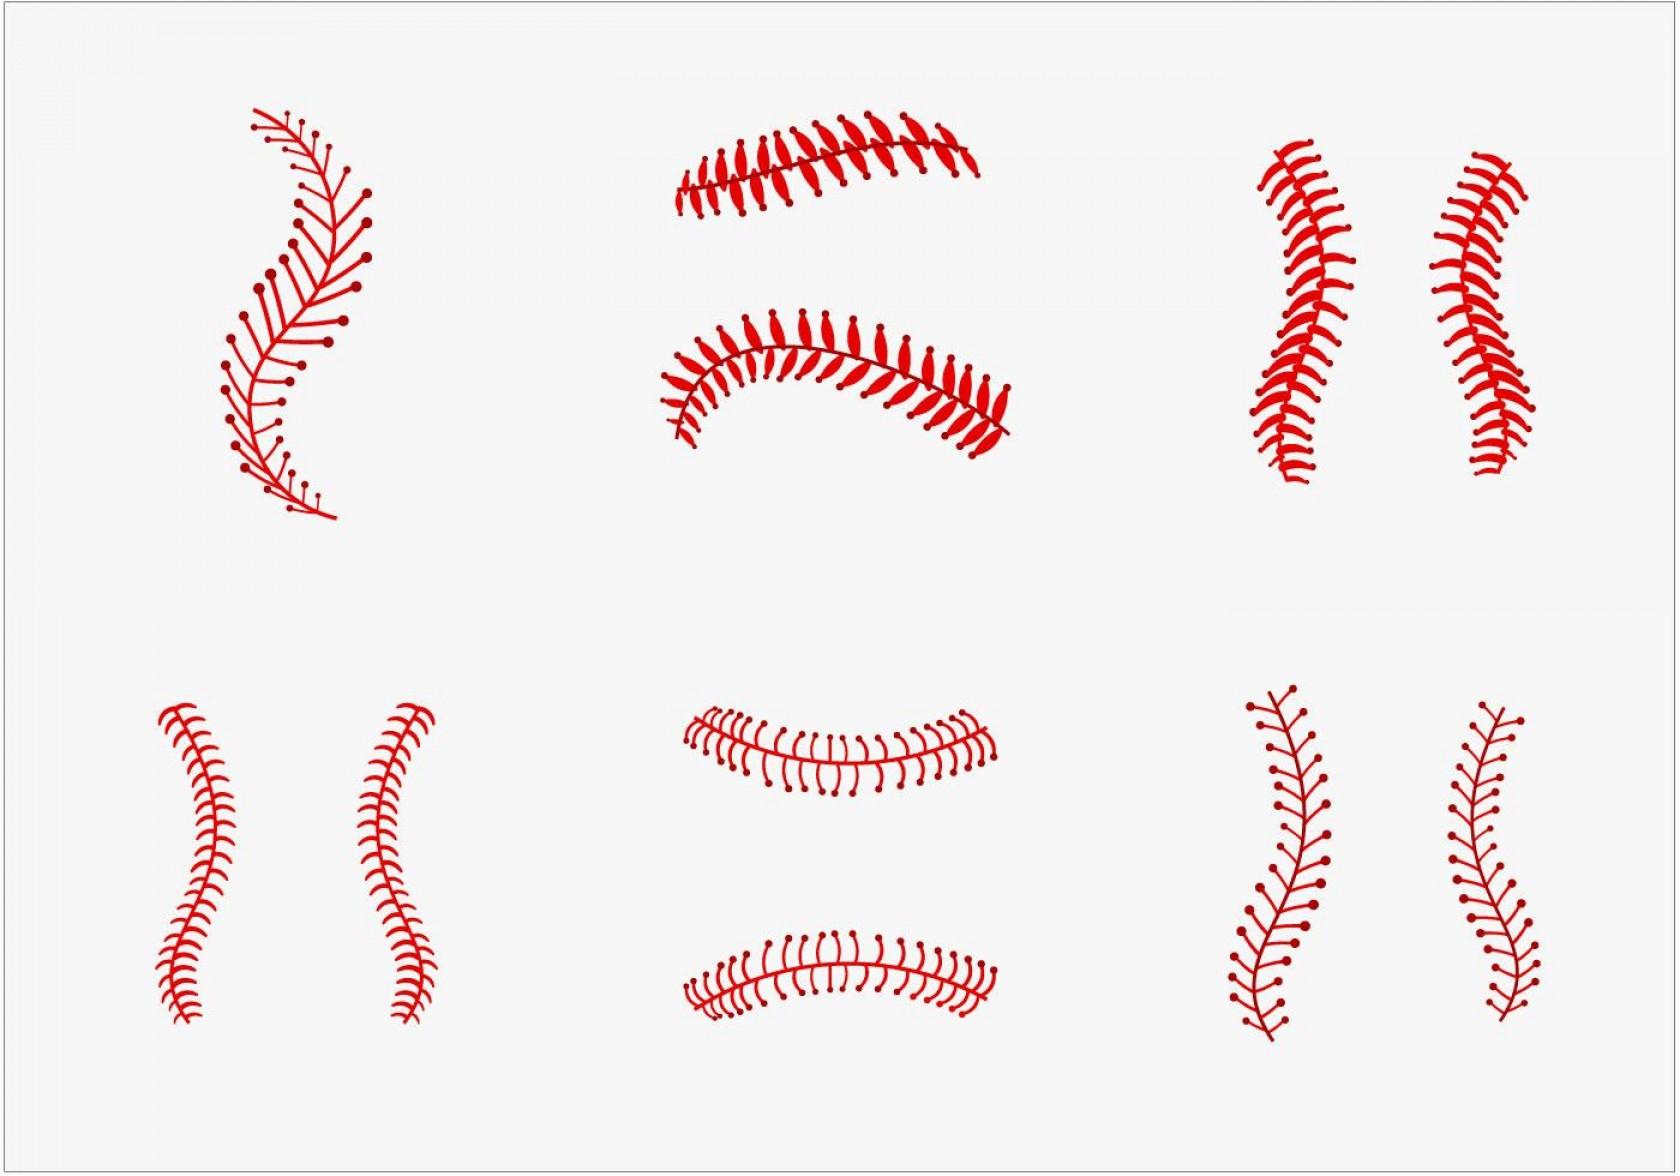 Download Softball Vector at GetDrawings.com | Free for personal use ...